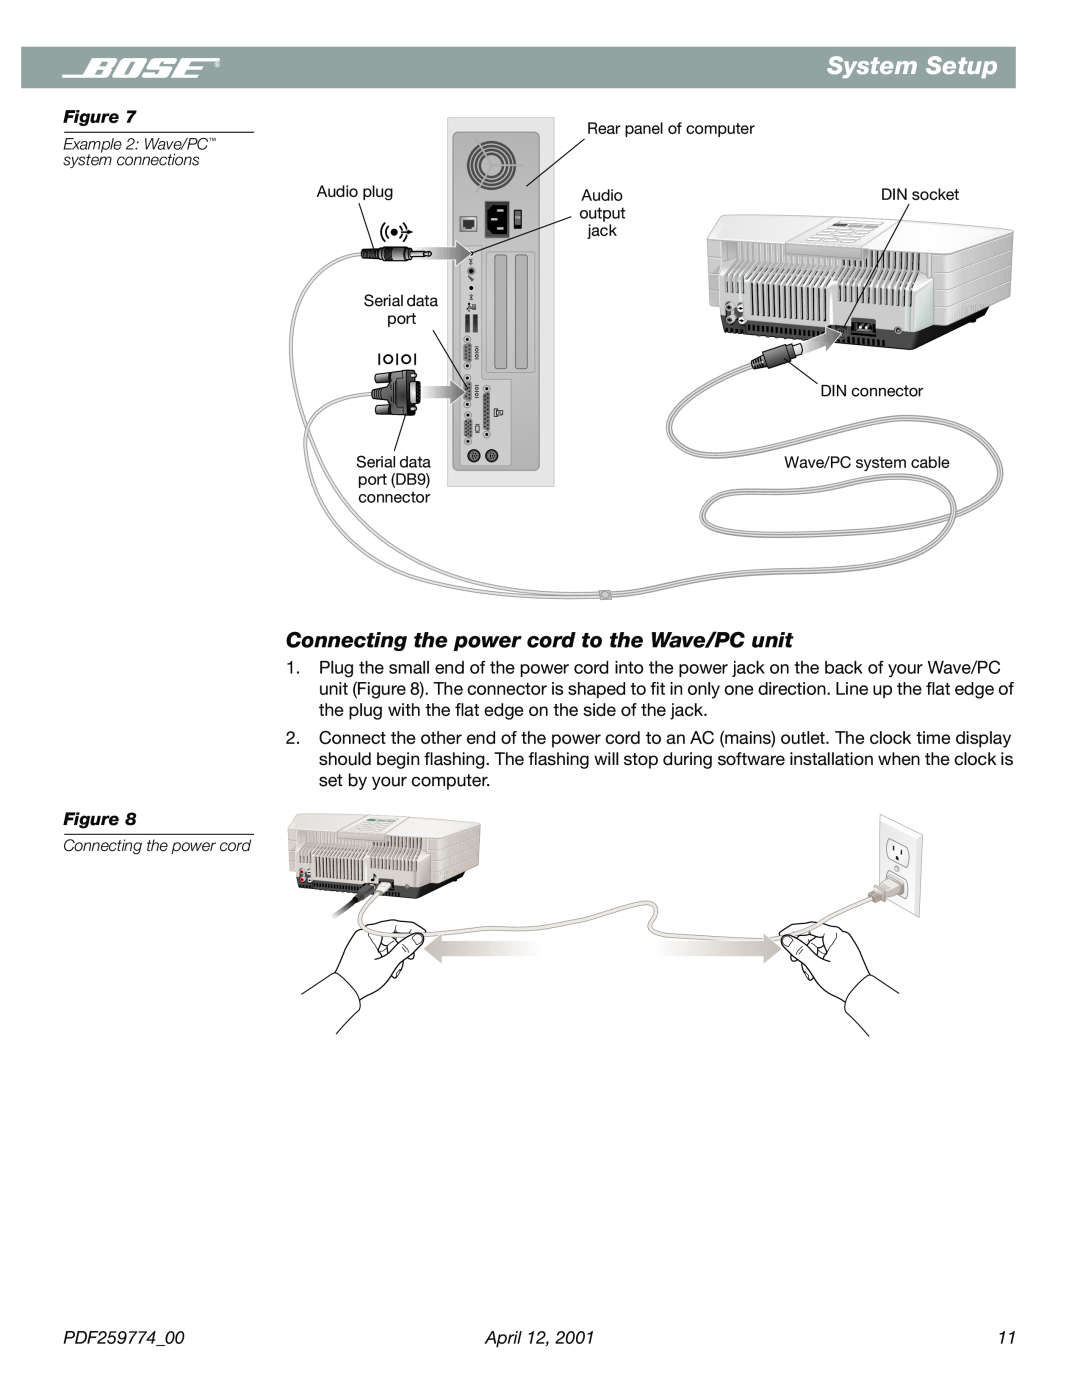 Bose PDF259774_00 manual Connecting the power cord to the Wave/PC unit, System Setup 